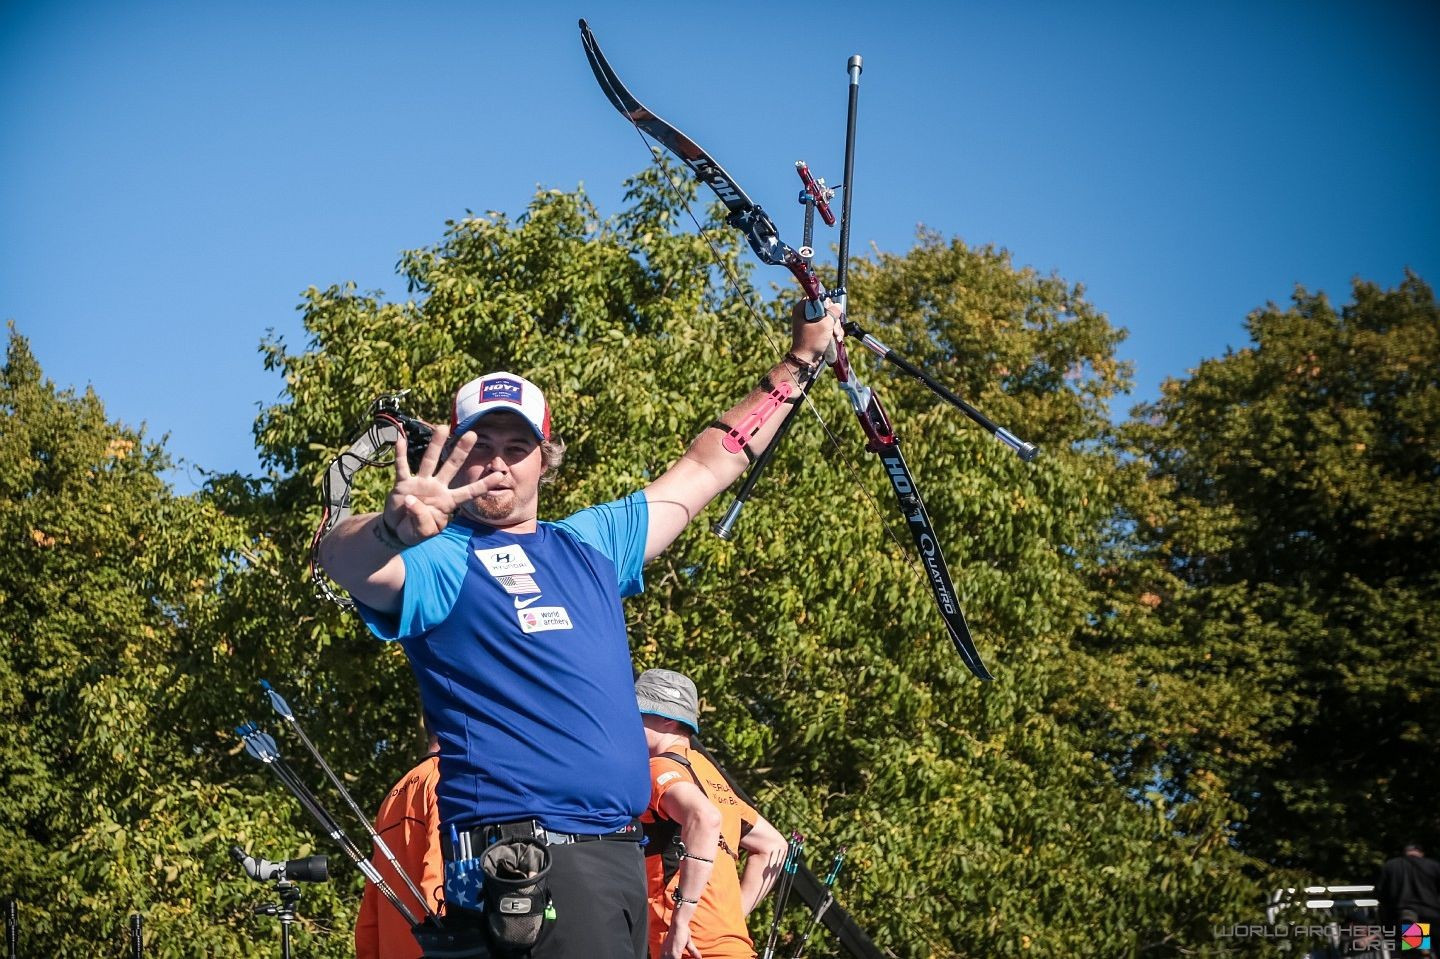 Four-time Archery World Cup Final winner Brady Ellison is considered the man to beat in the men's recurve event ©World Archery